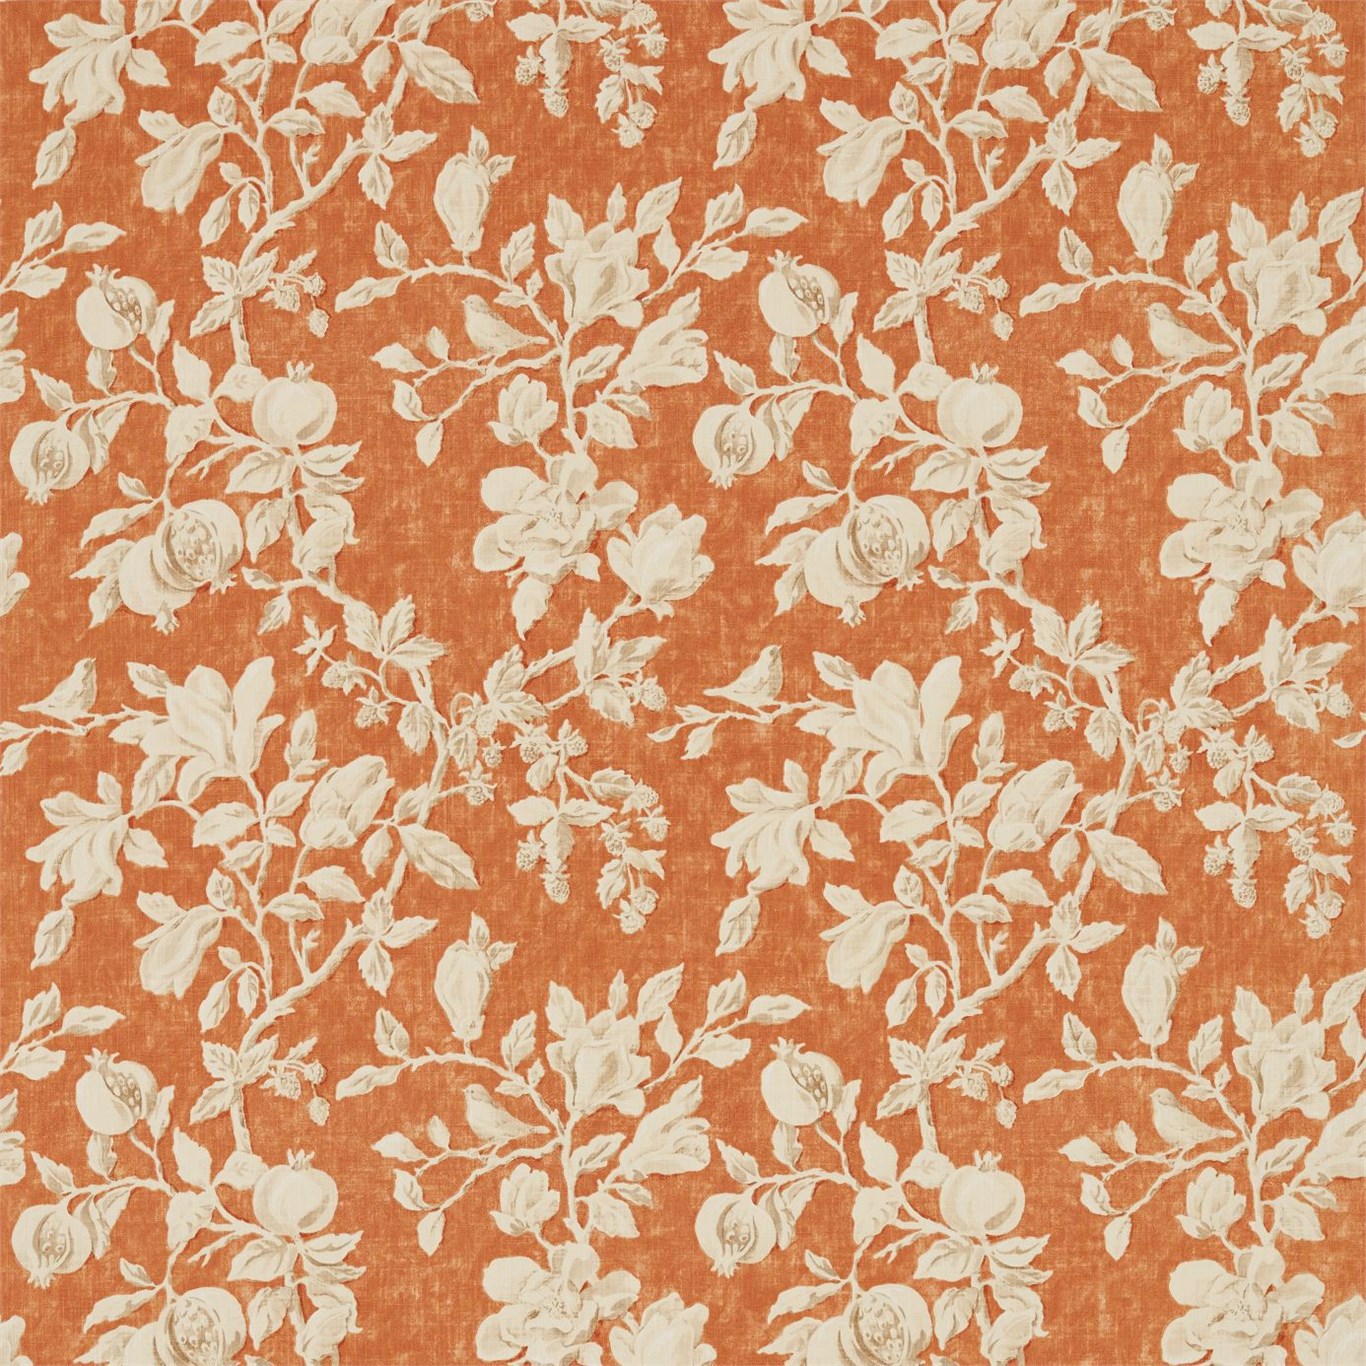 Magnolia & Pomegranate Russet/Wheat Fabric by SAN